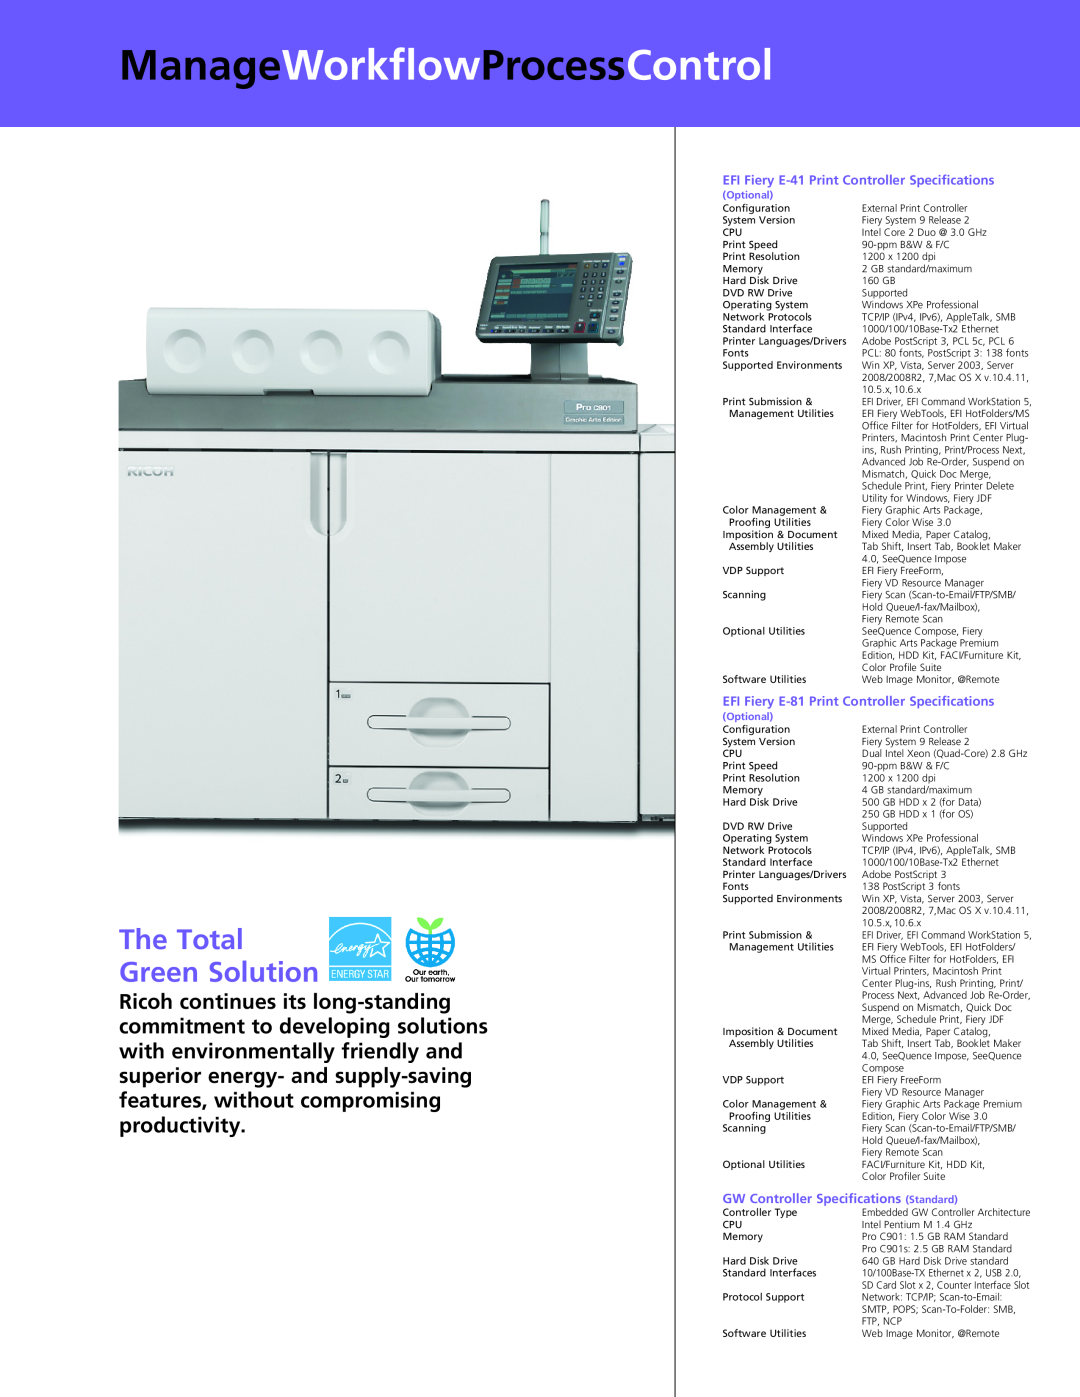 Ricoh C901S ManageWorkflowProcessControl, The Total Green Solution, EFI Fiery E-41 Print Controller Specifications 